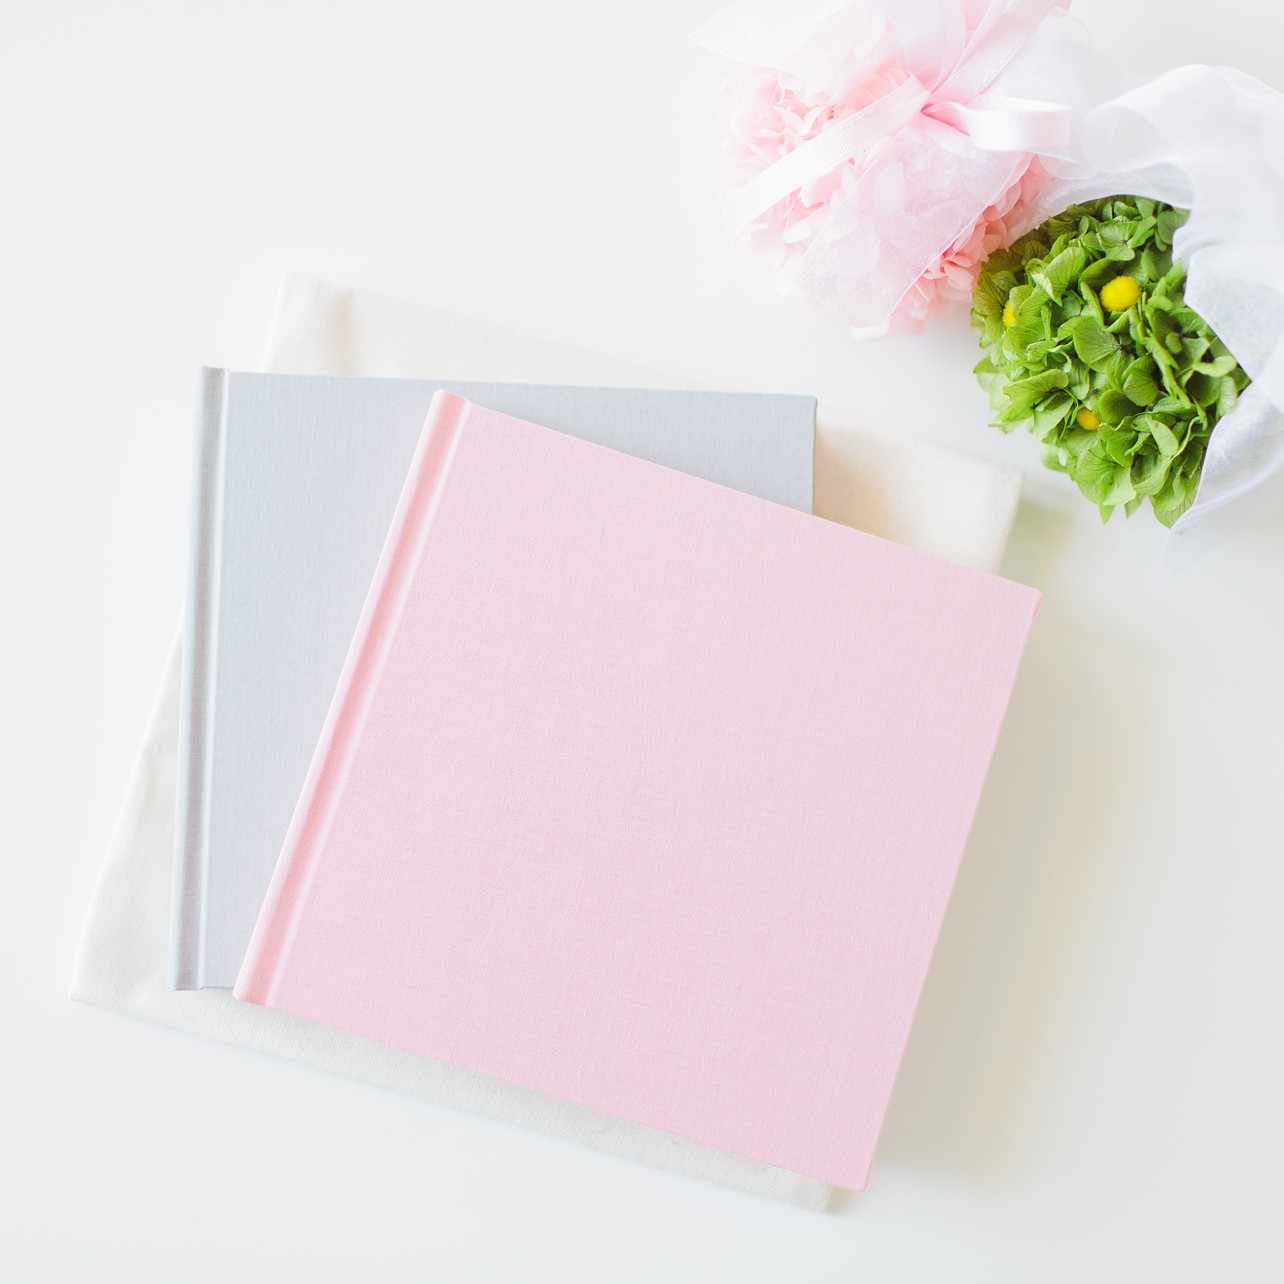 pink and gray linen photo album on the desk | Mai Fotography | Discovery Bay HK Photographer